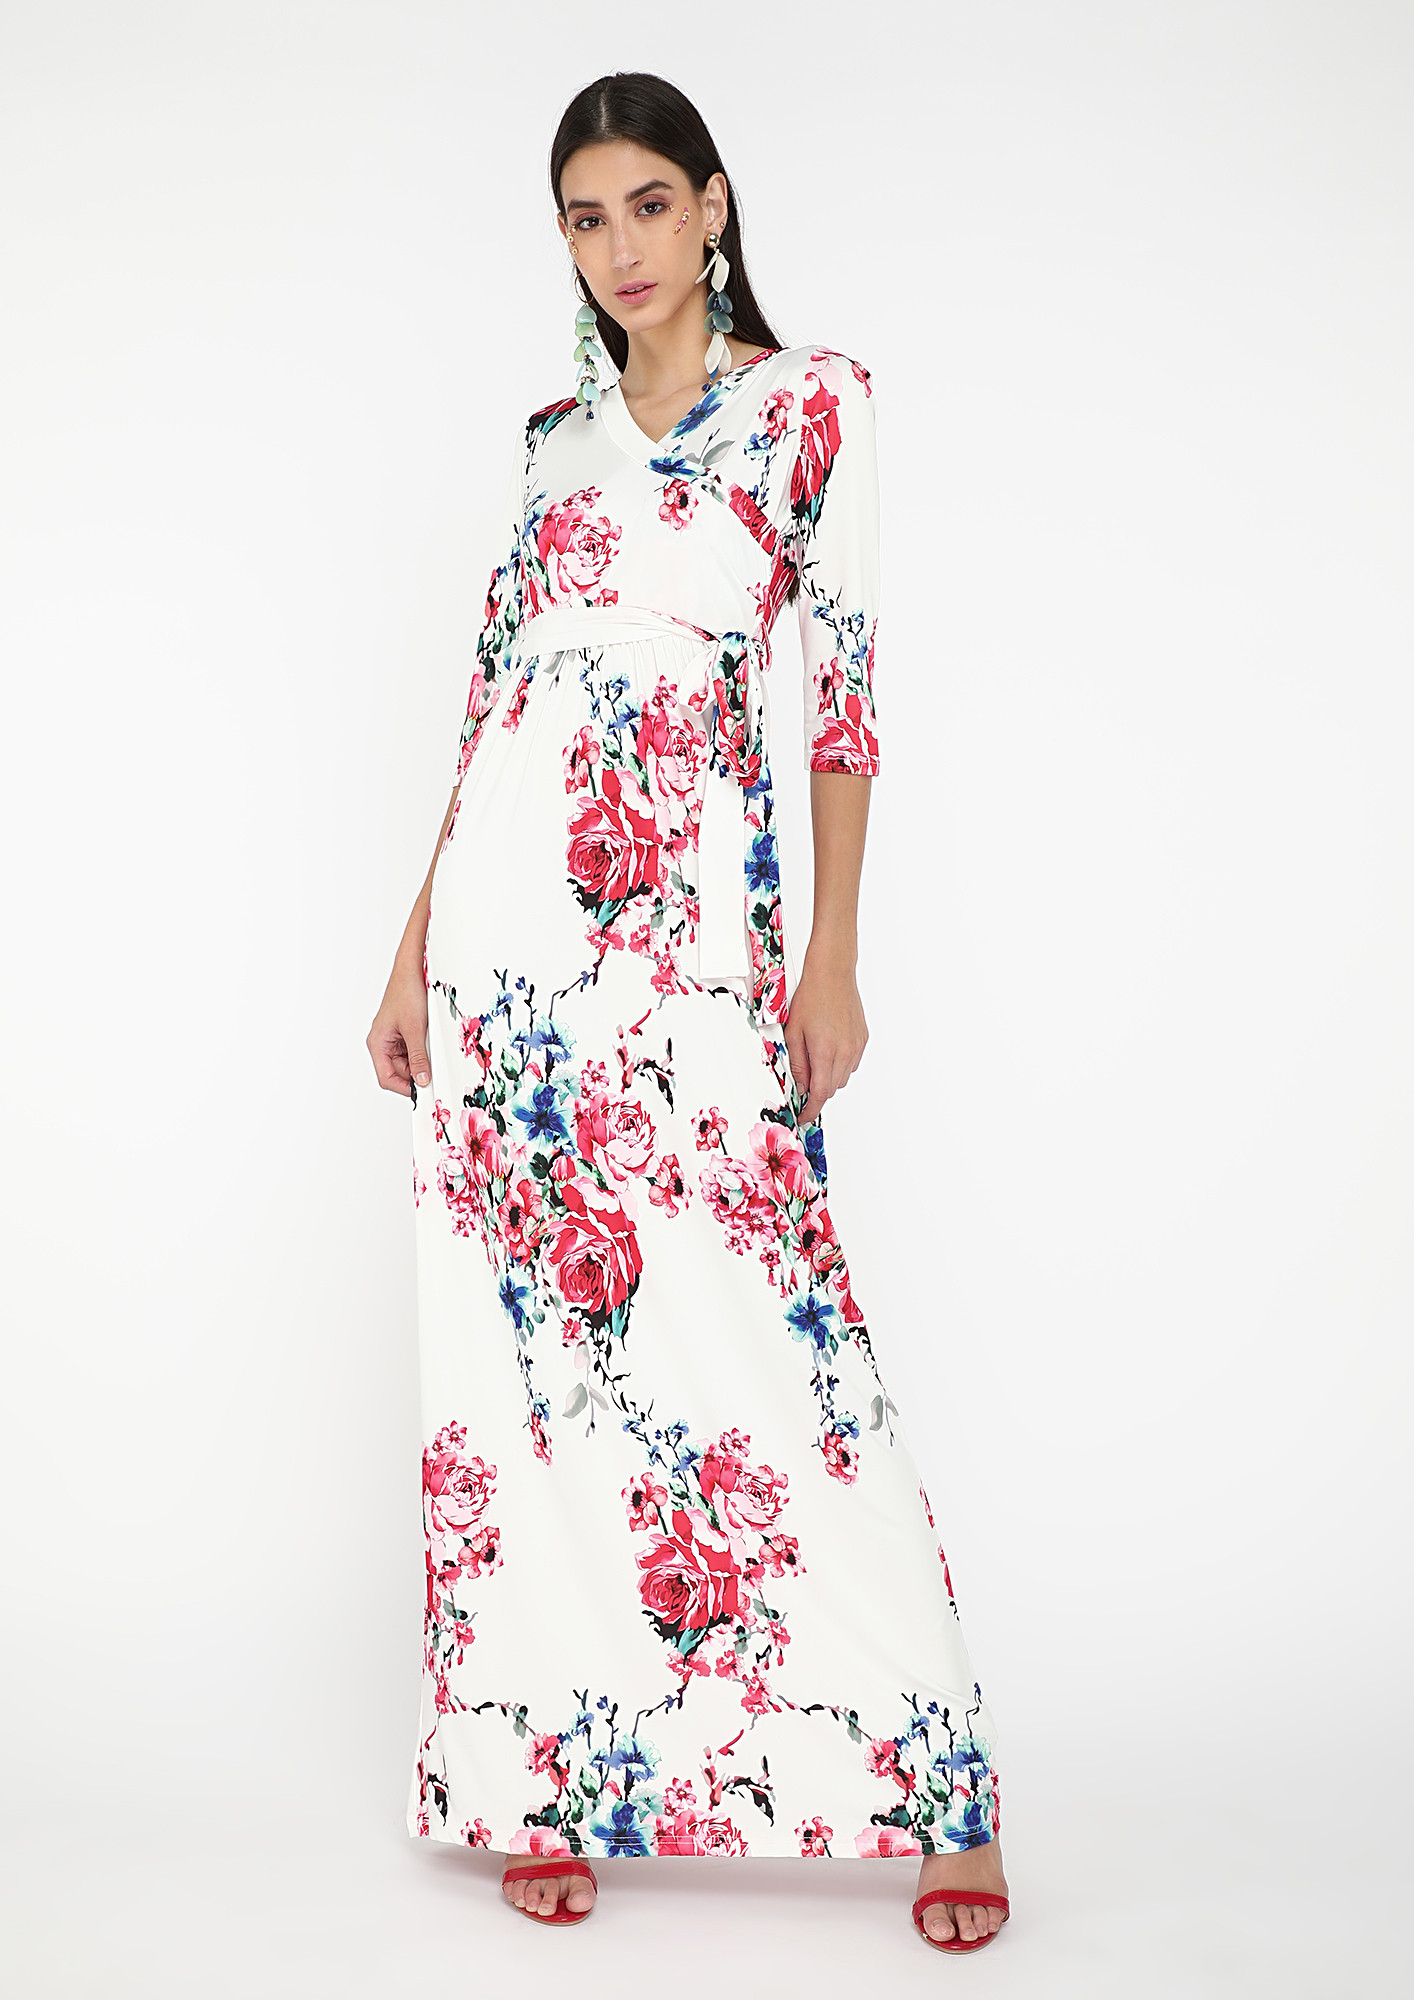 IN LOVE WITH FLORAL WHITE MAXI DRESS